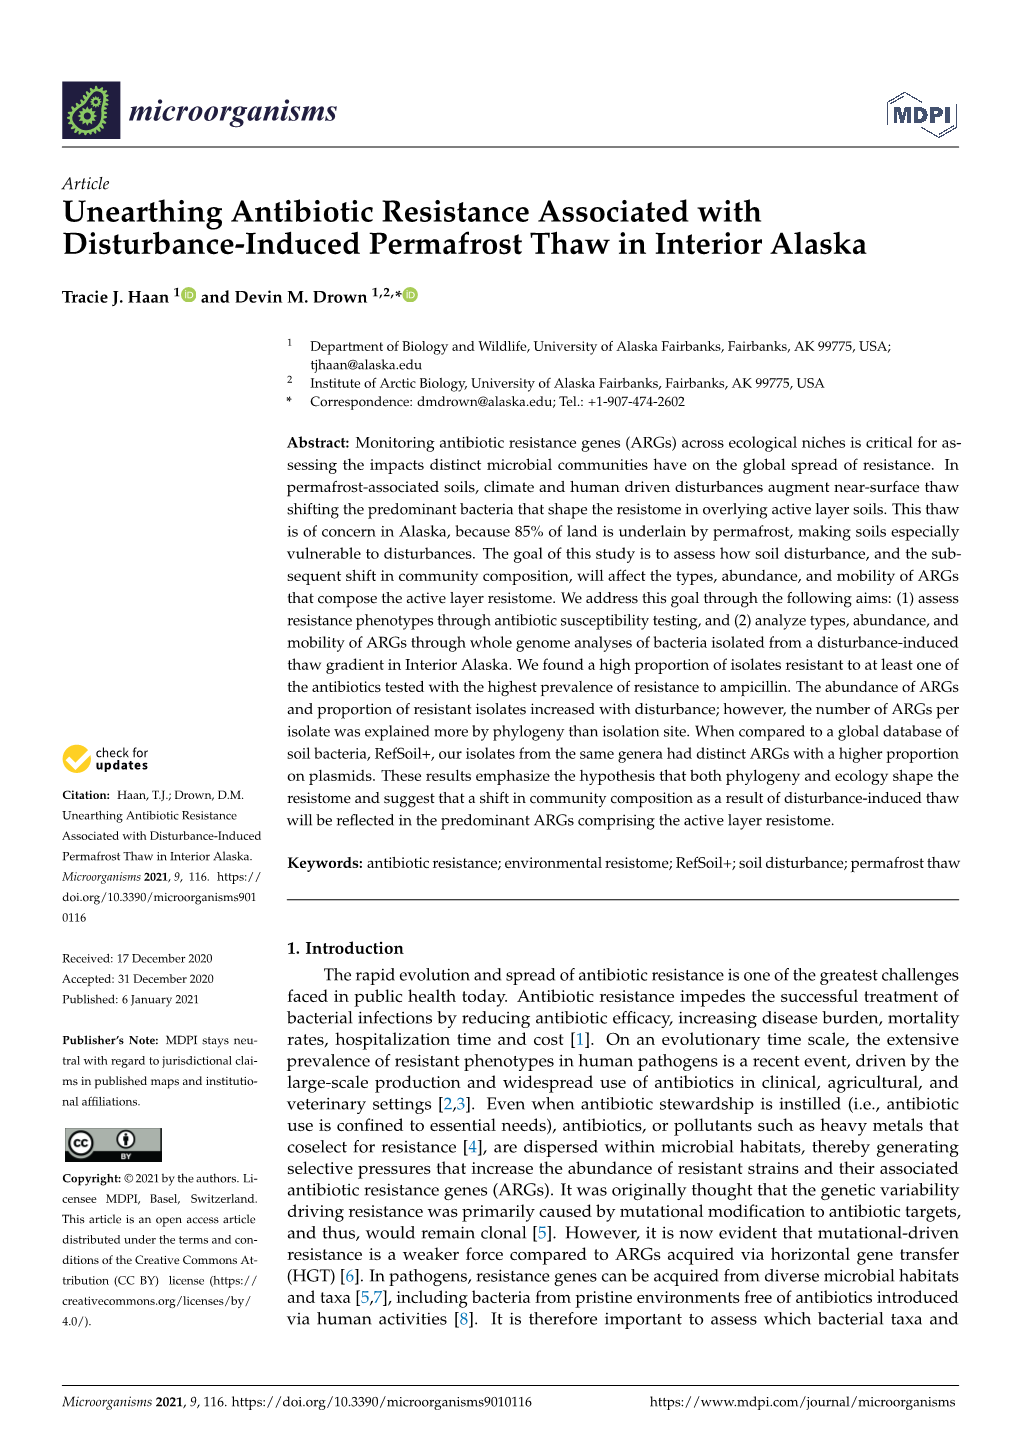 Unearthing Antibiotic Resistance Associated with Disturbance-Induced Permafrost Thaw in Interior Alaska